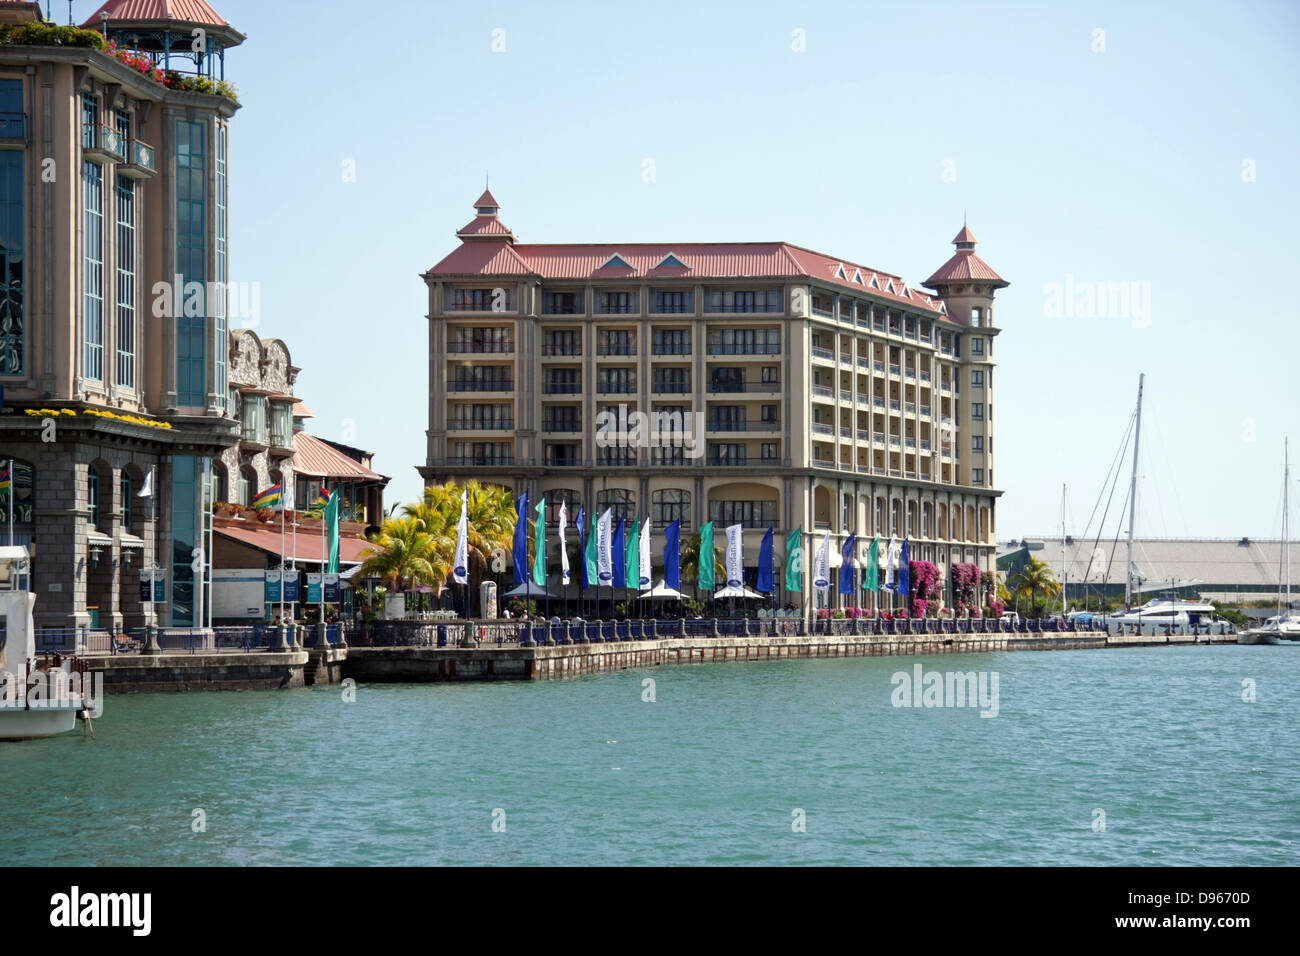 Labourdonnais Hotel on the waterfront in Port Louis, Mauritius Stock Photo  - Alamy